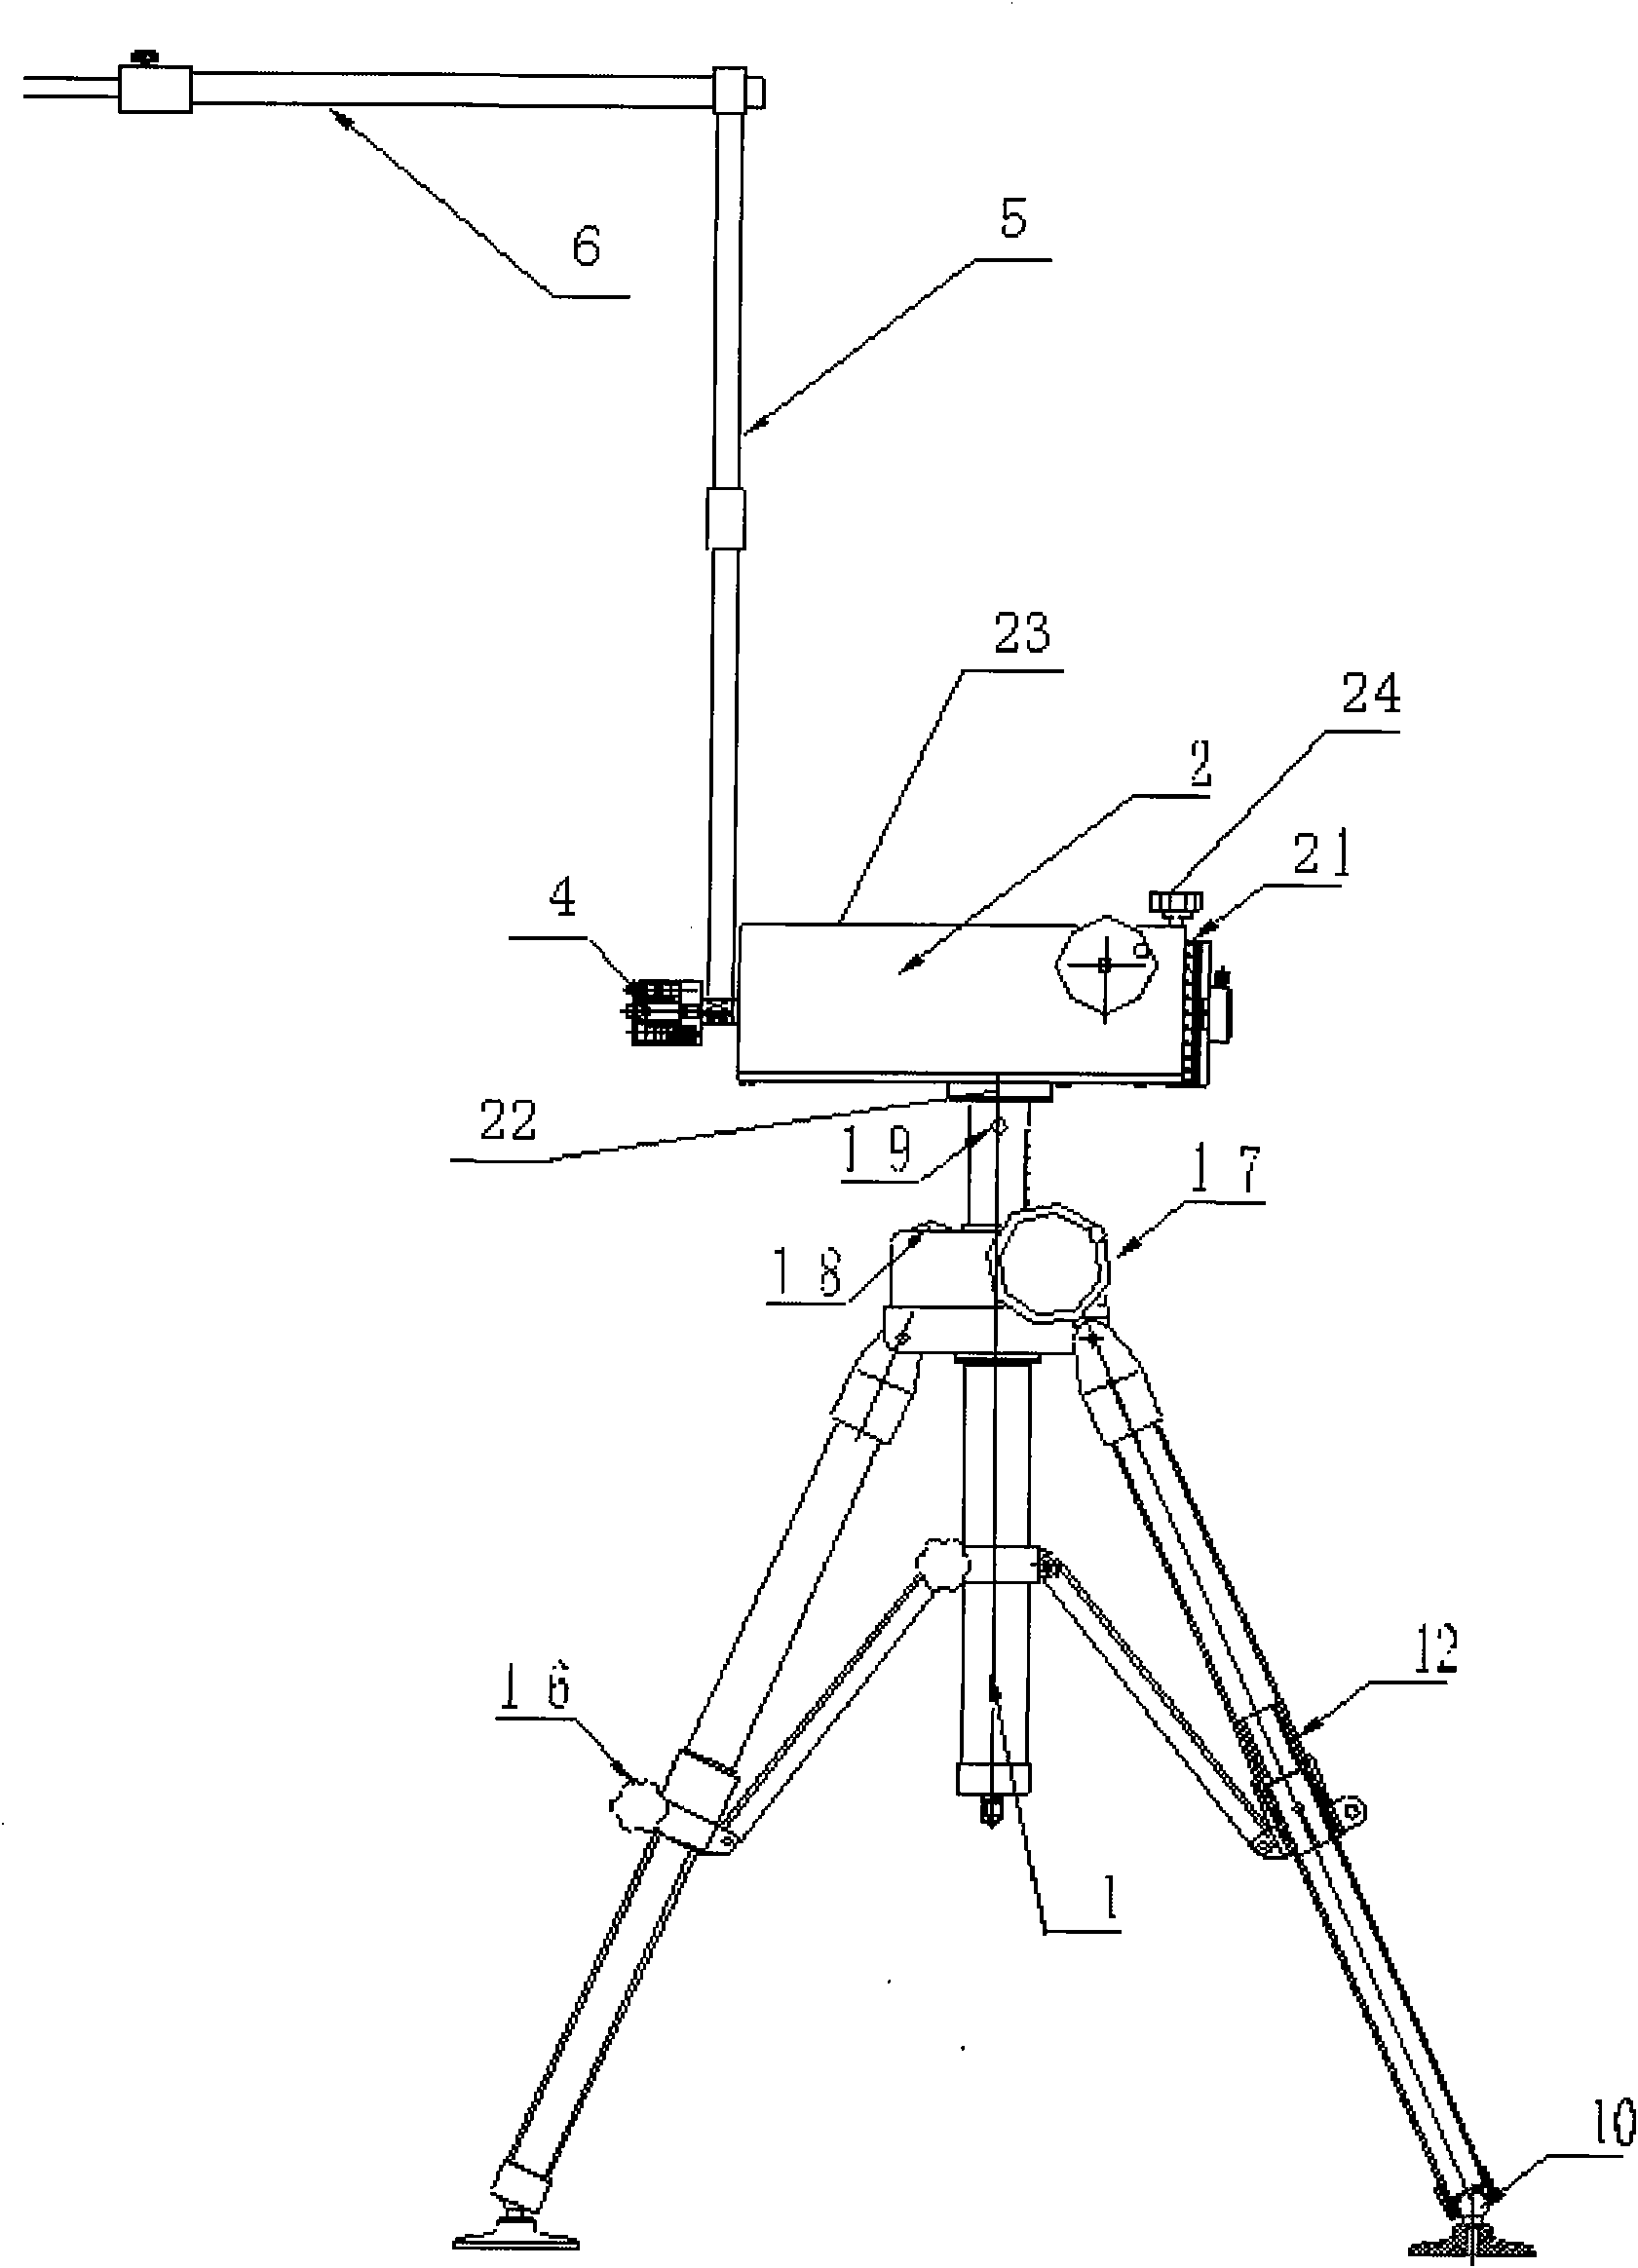 Airplane external illuminating space angle-positioning combining equipment